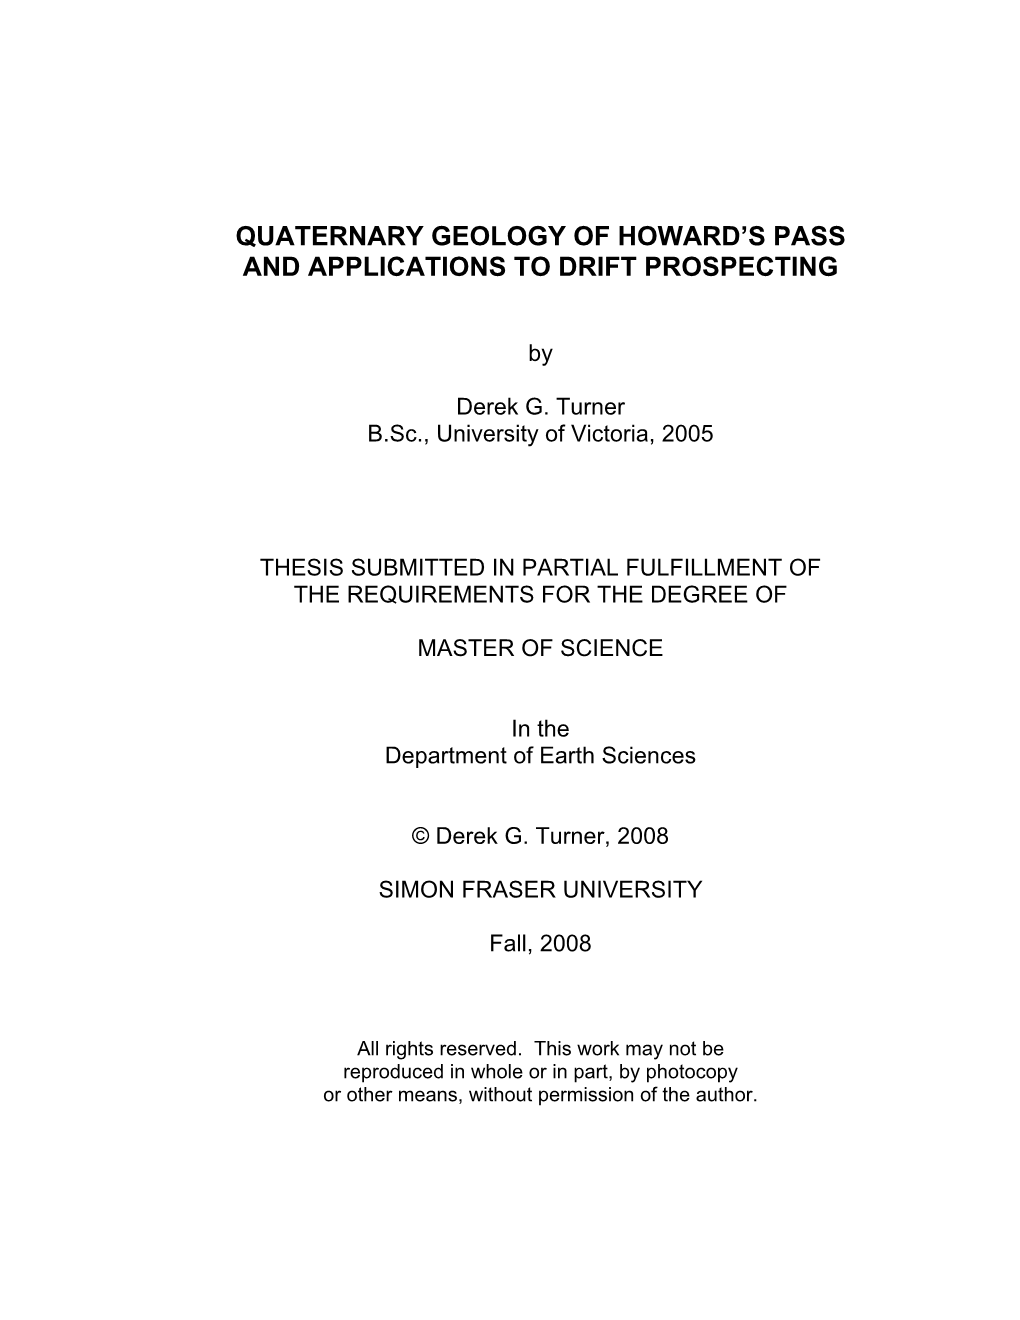 Quaternary Geology of Howard's Pass And